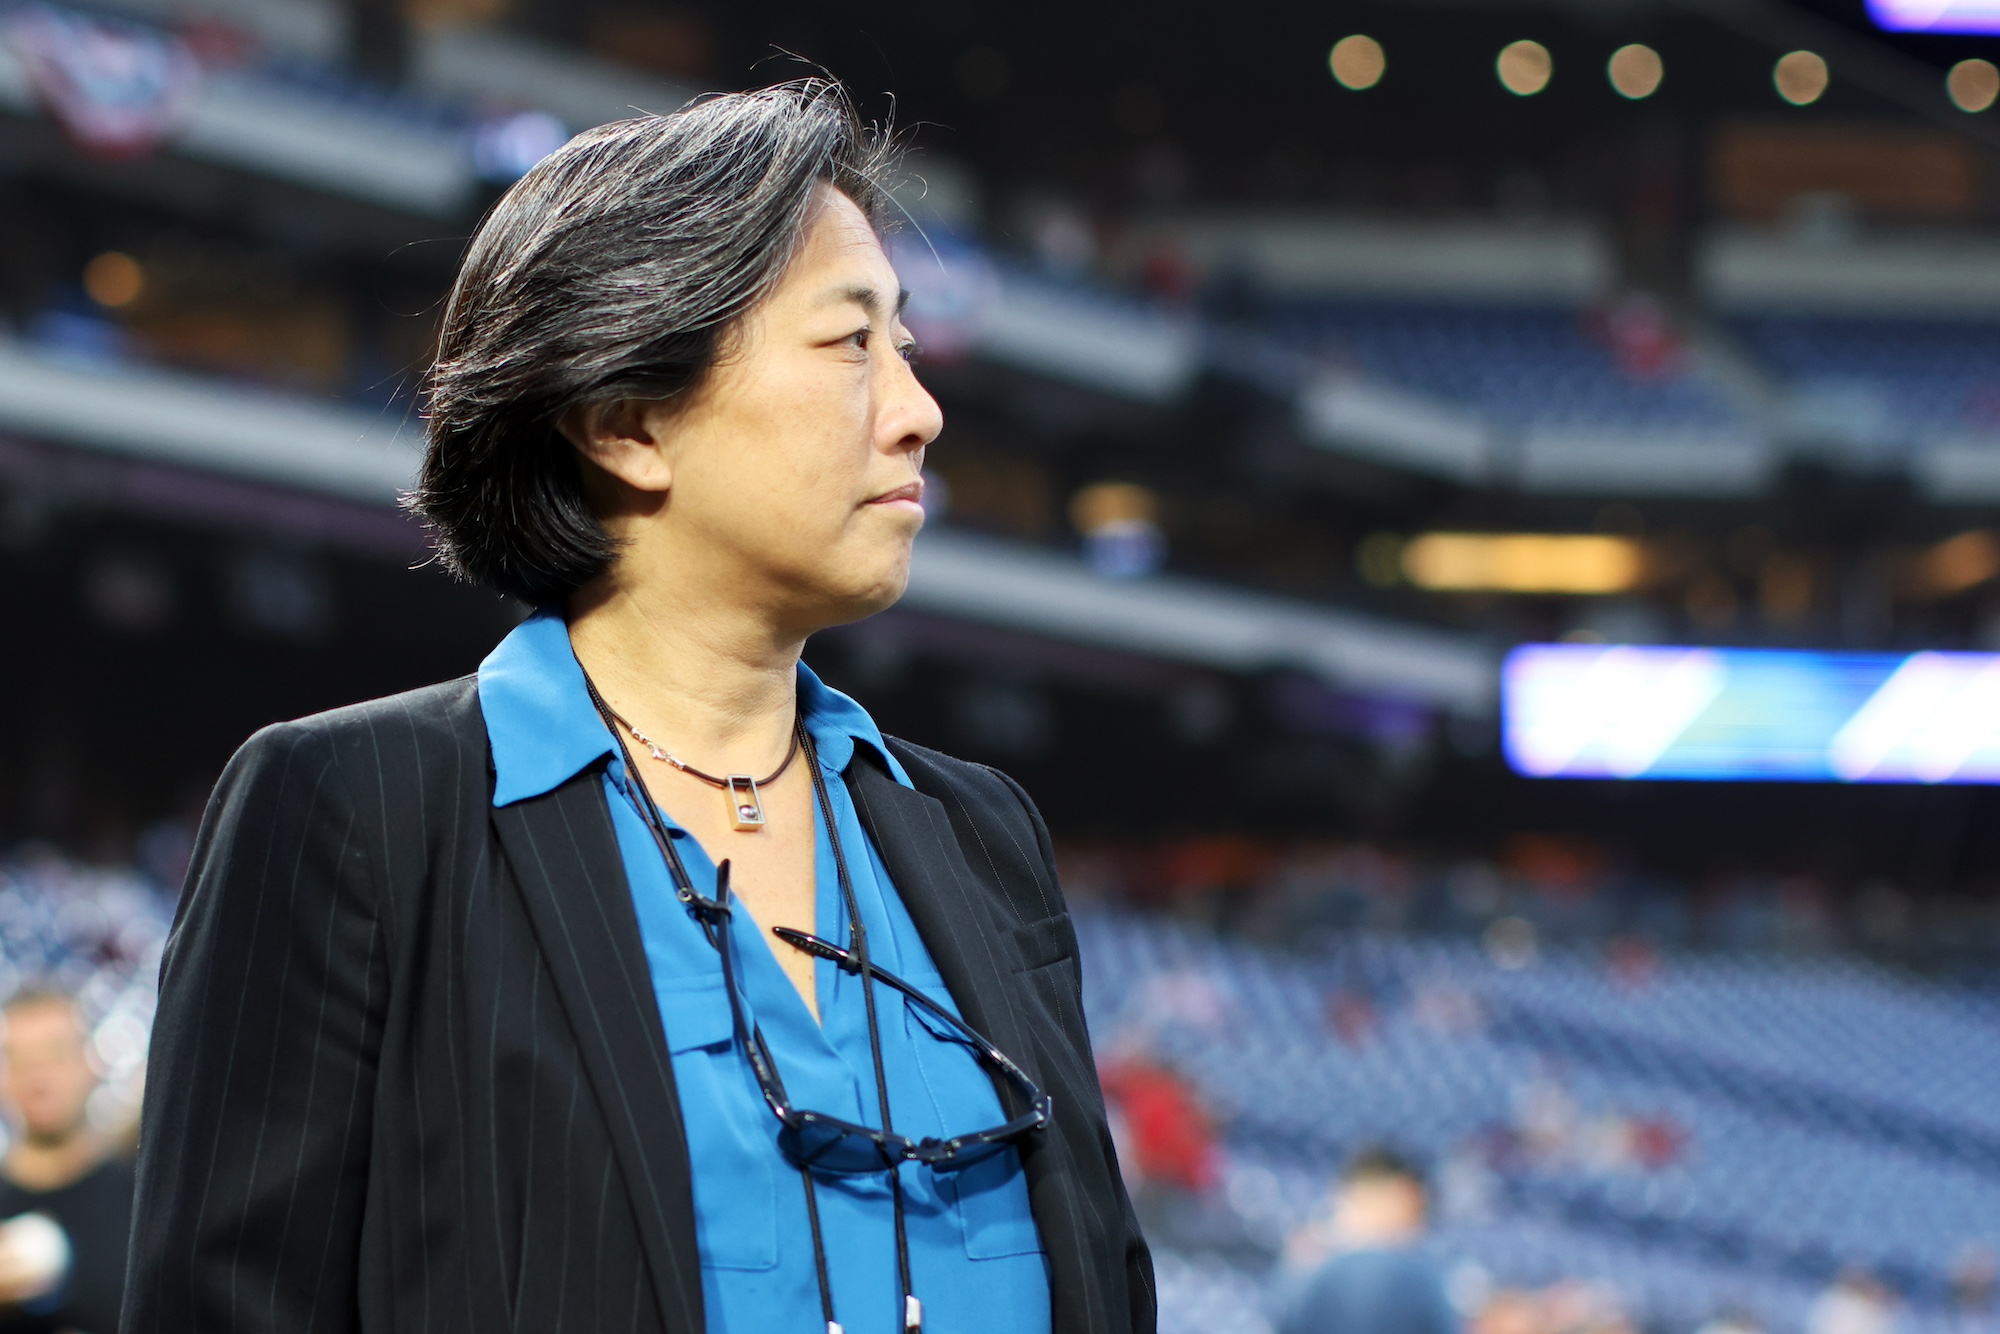 PHILADELPHIA, PA - OCTOBER 03: Miami Marlins general manager Kim Ng looks on prior to Game 1 of the Wild Card Series between the Miami Marlins and the Philadelphia Phillies at Citizens Bank Park on Tuesday, October 3, 2023 in Philadelphia, Pennsylvania. (Photo by Rob Tringali/MLB Photos via Getty Images)